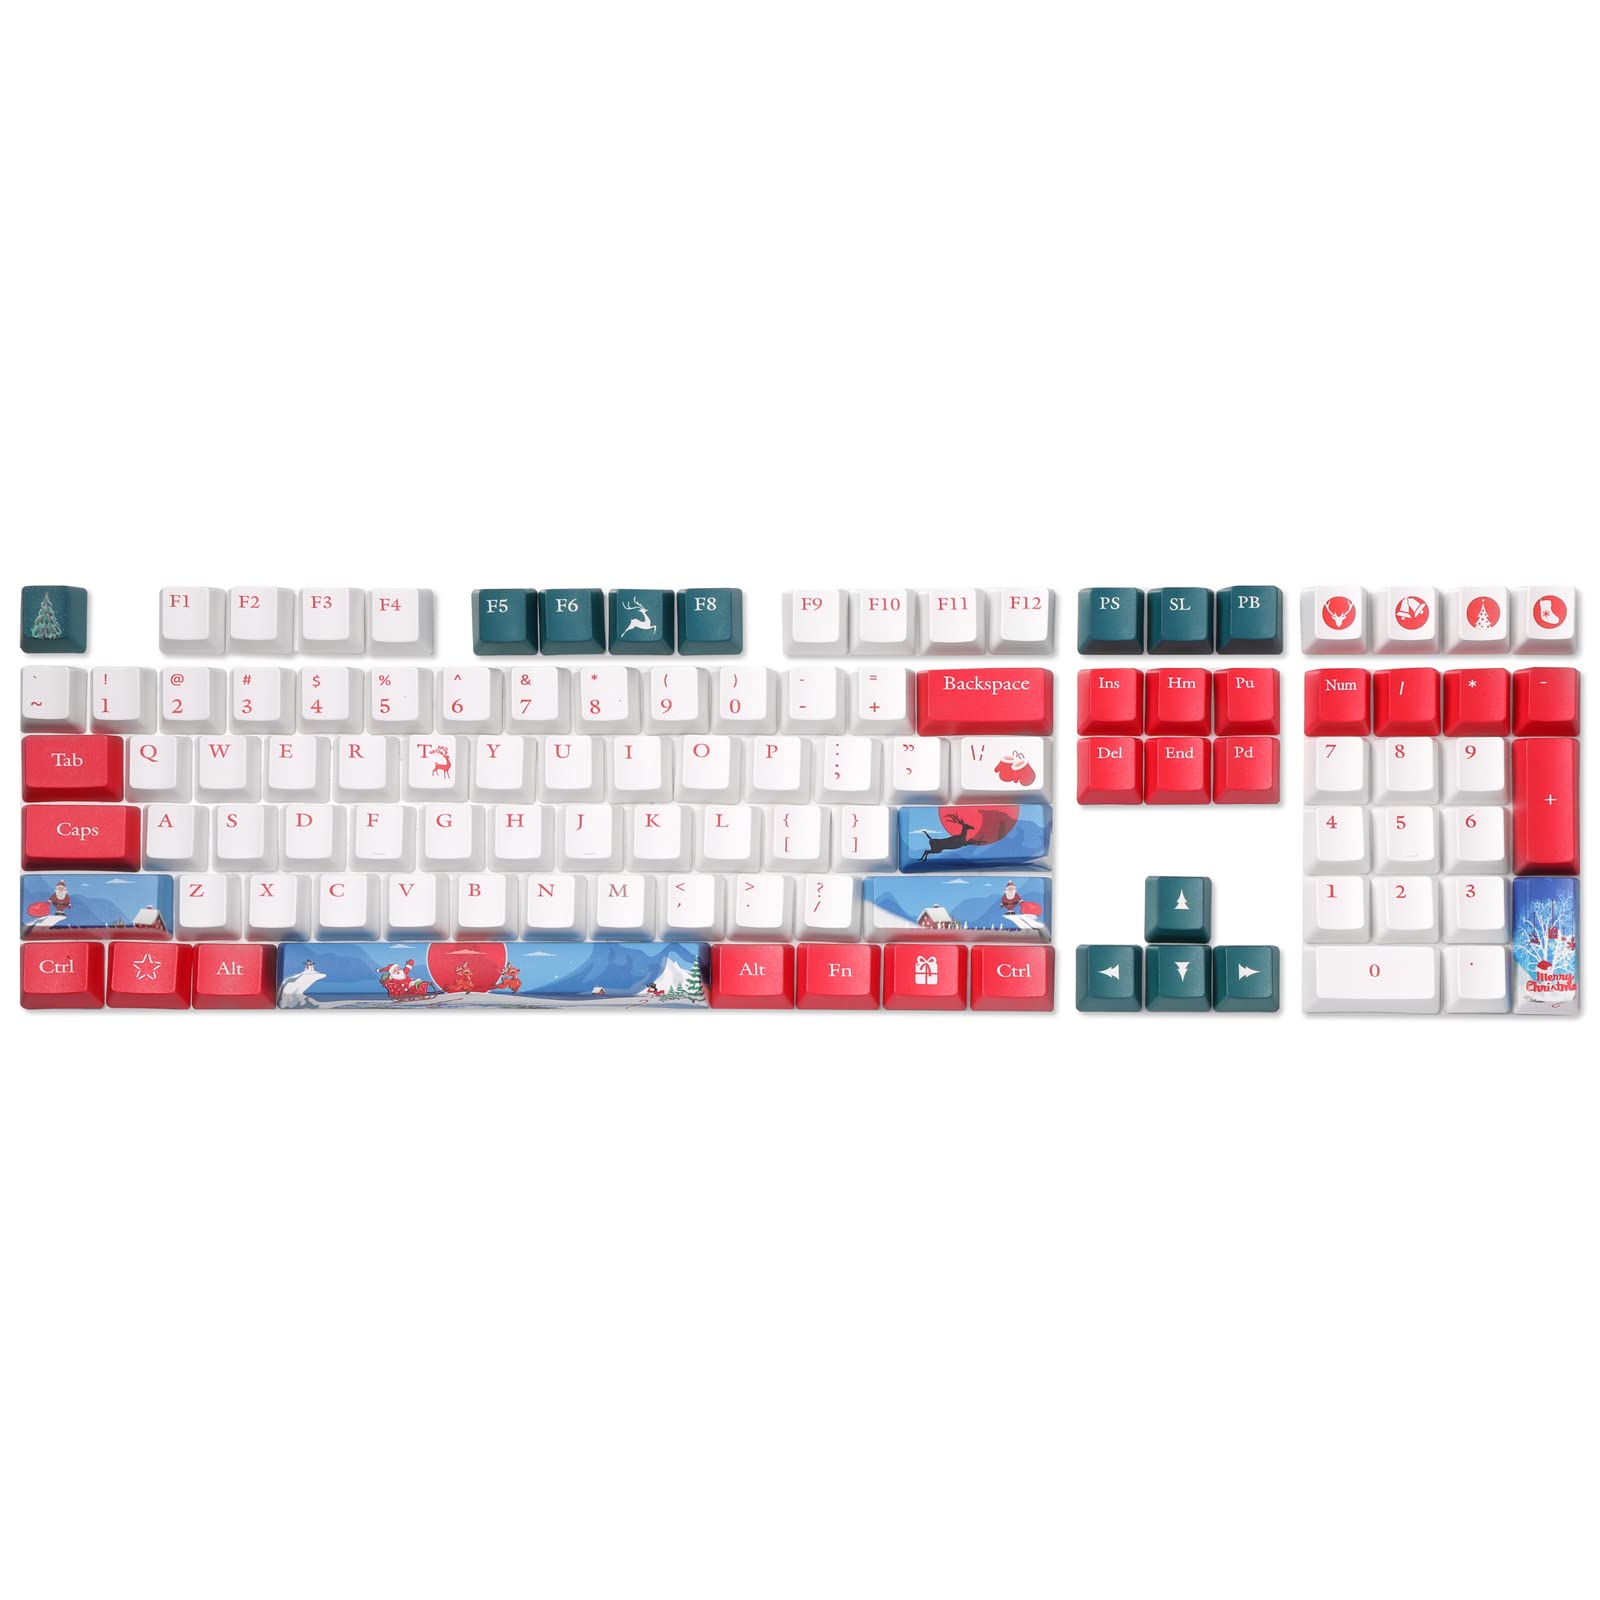 (Only Keycaps) Redragon X LTC  PBT 108 Keycaps Set, Thick PBT Keycaps for Mechanical Keyboard (Christmas Limited Edition)